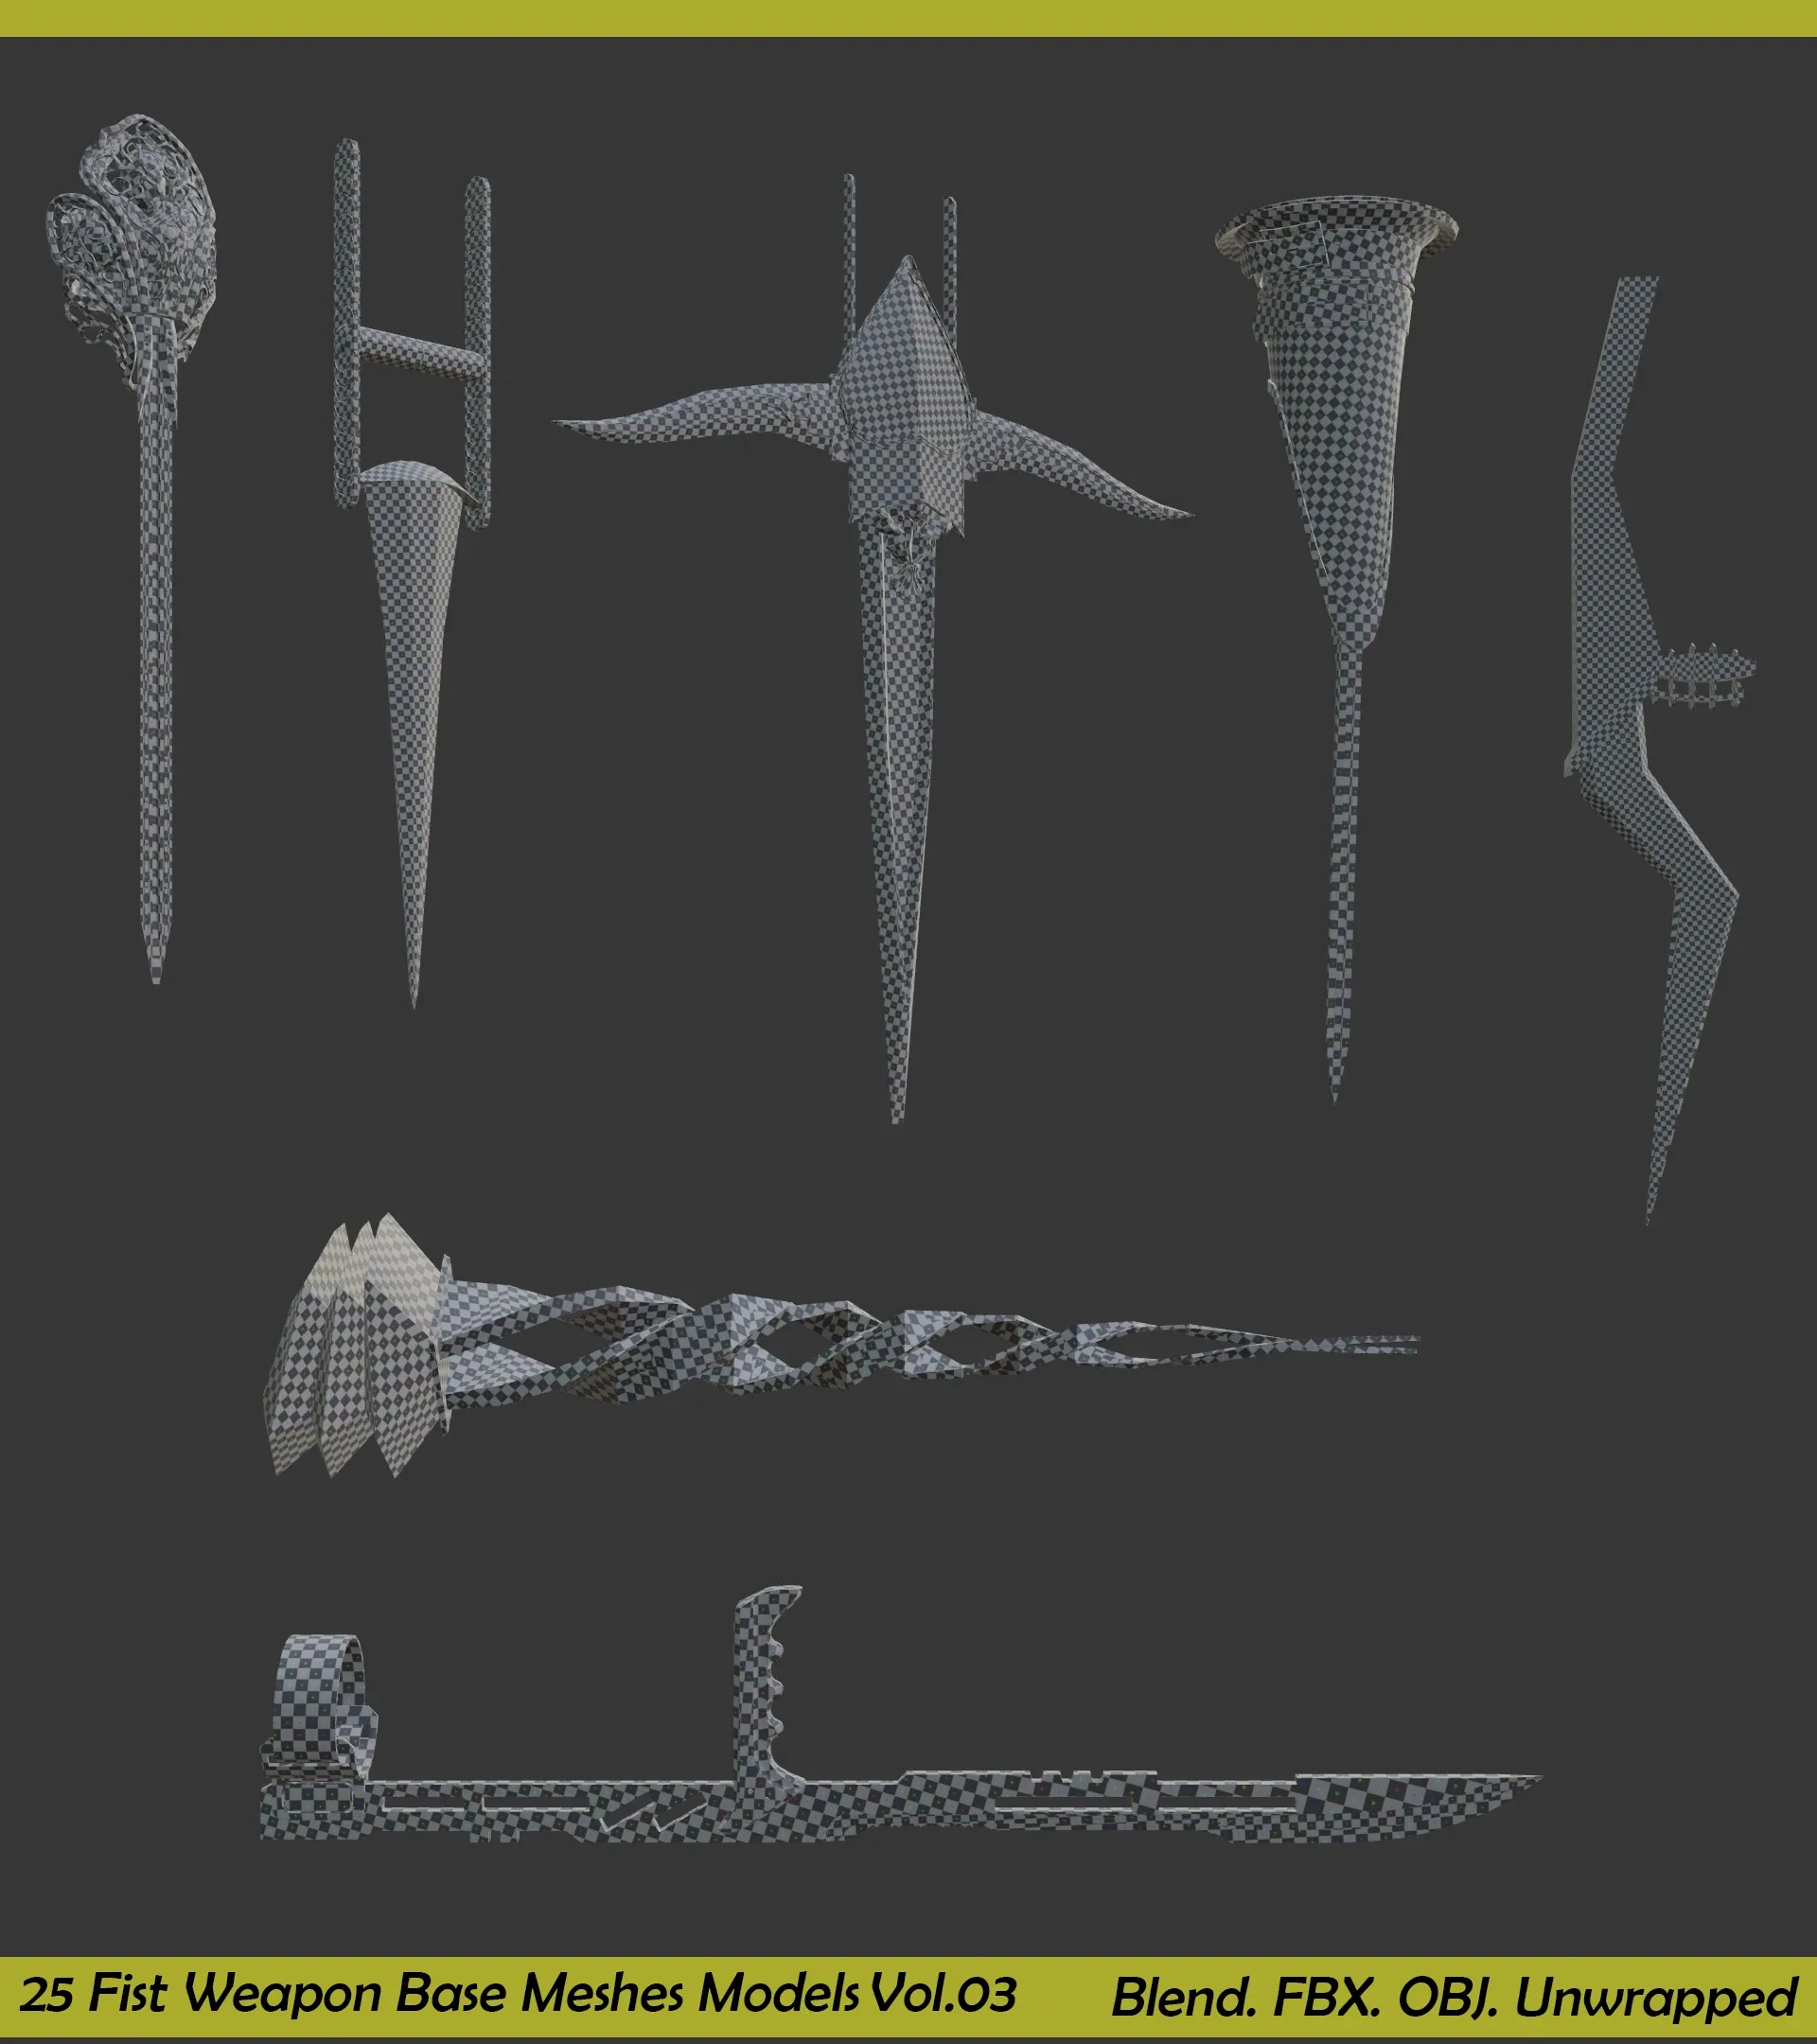 25 Fist Weapon Base Mesh Collection - Vol.03